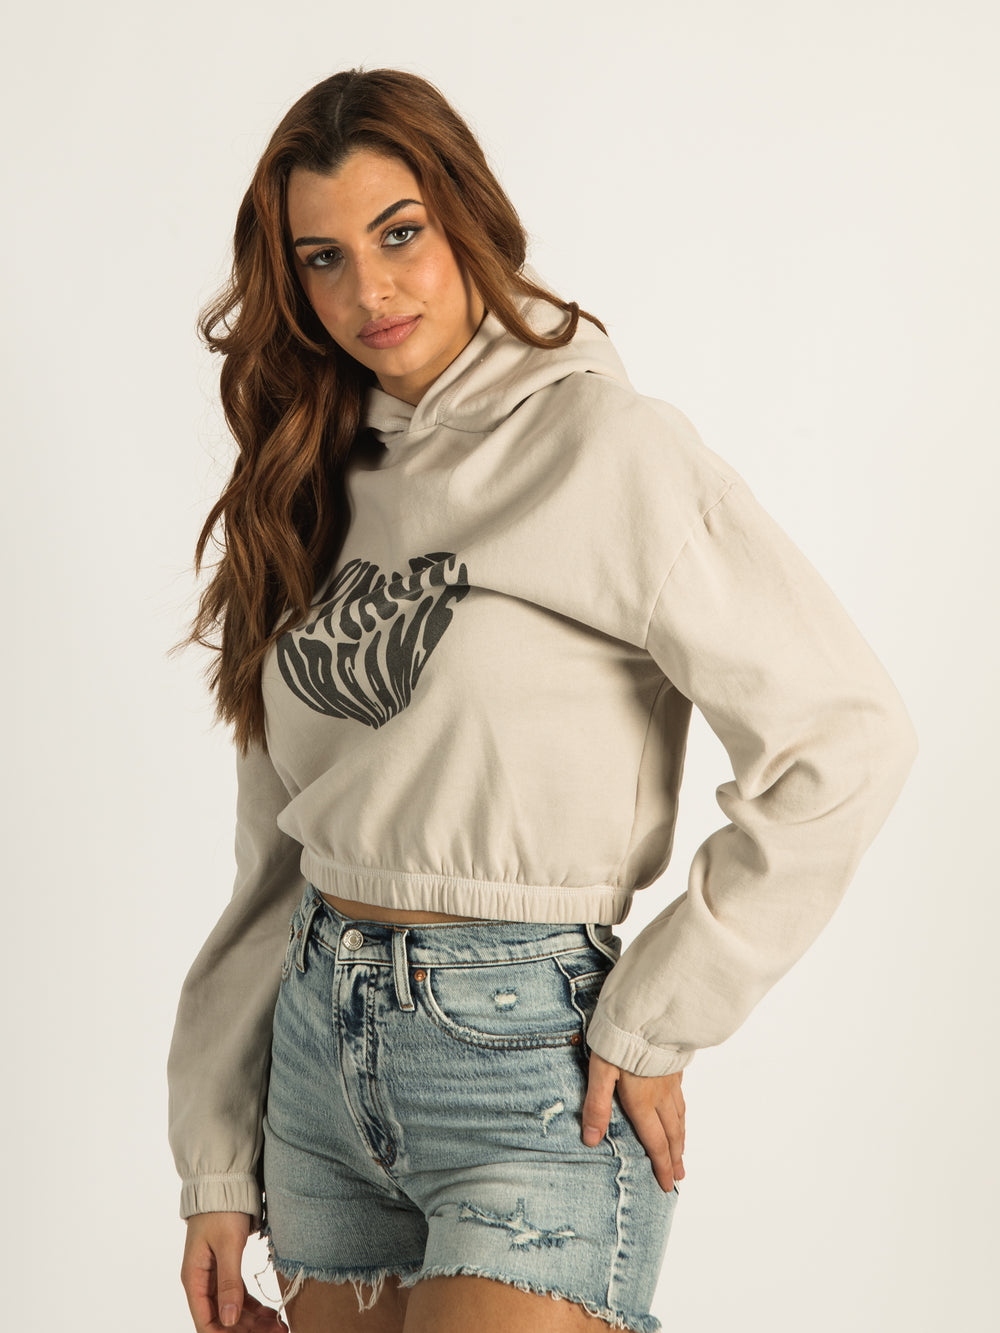 HARLOW HALLE POPOVER SCREEN HOODIE  - CLEARANCE